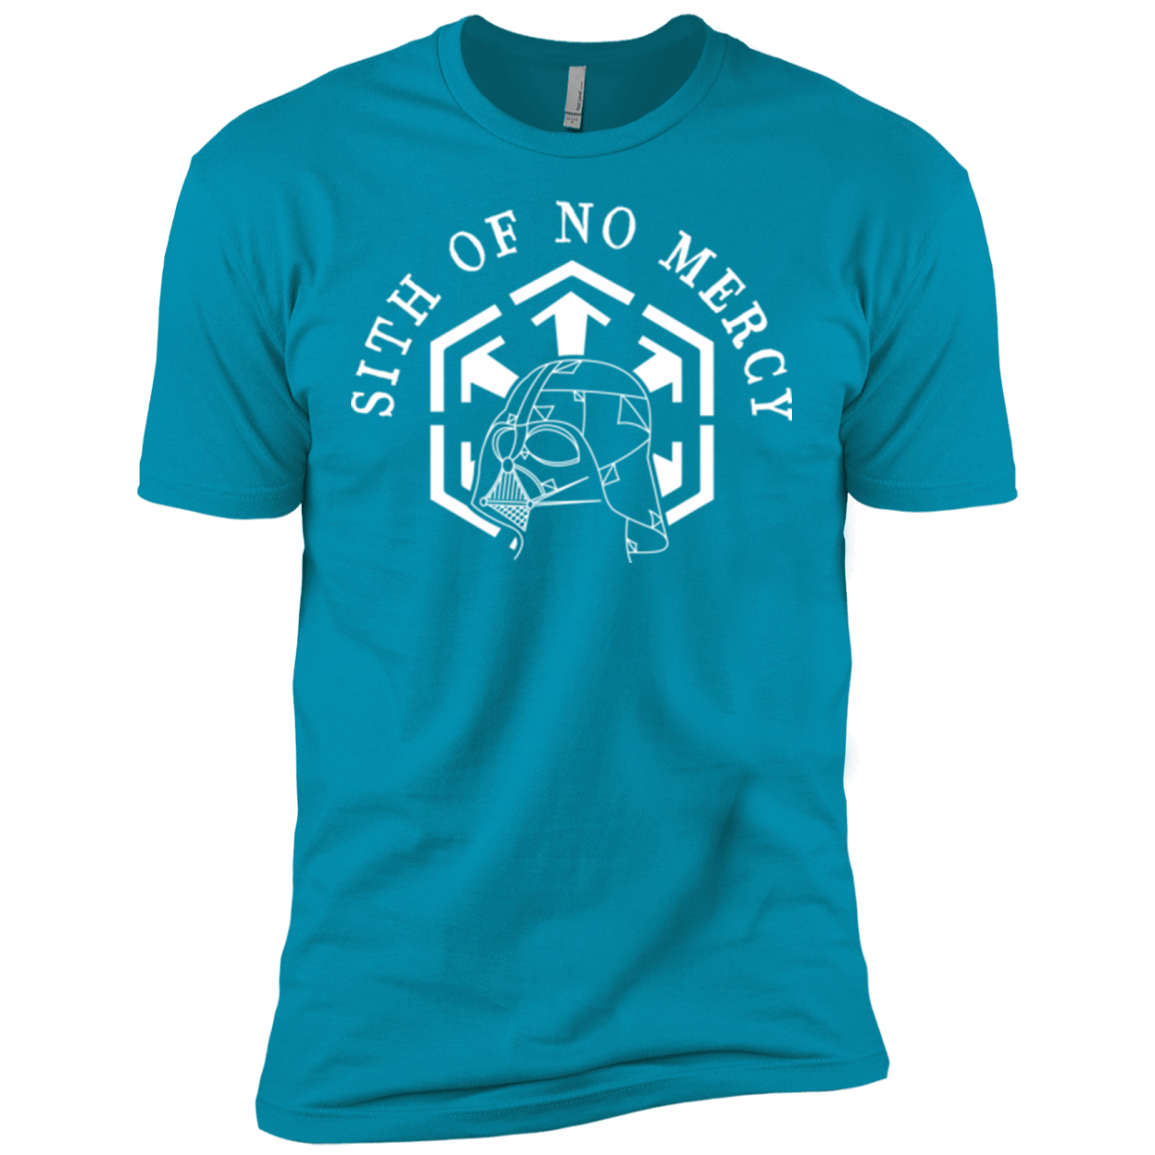 T-Shirts Turquoise / X-Small SITH OF NO MERCY Men's Premium T-Shirt